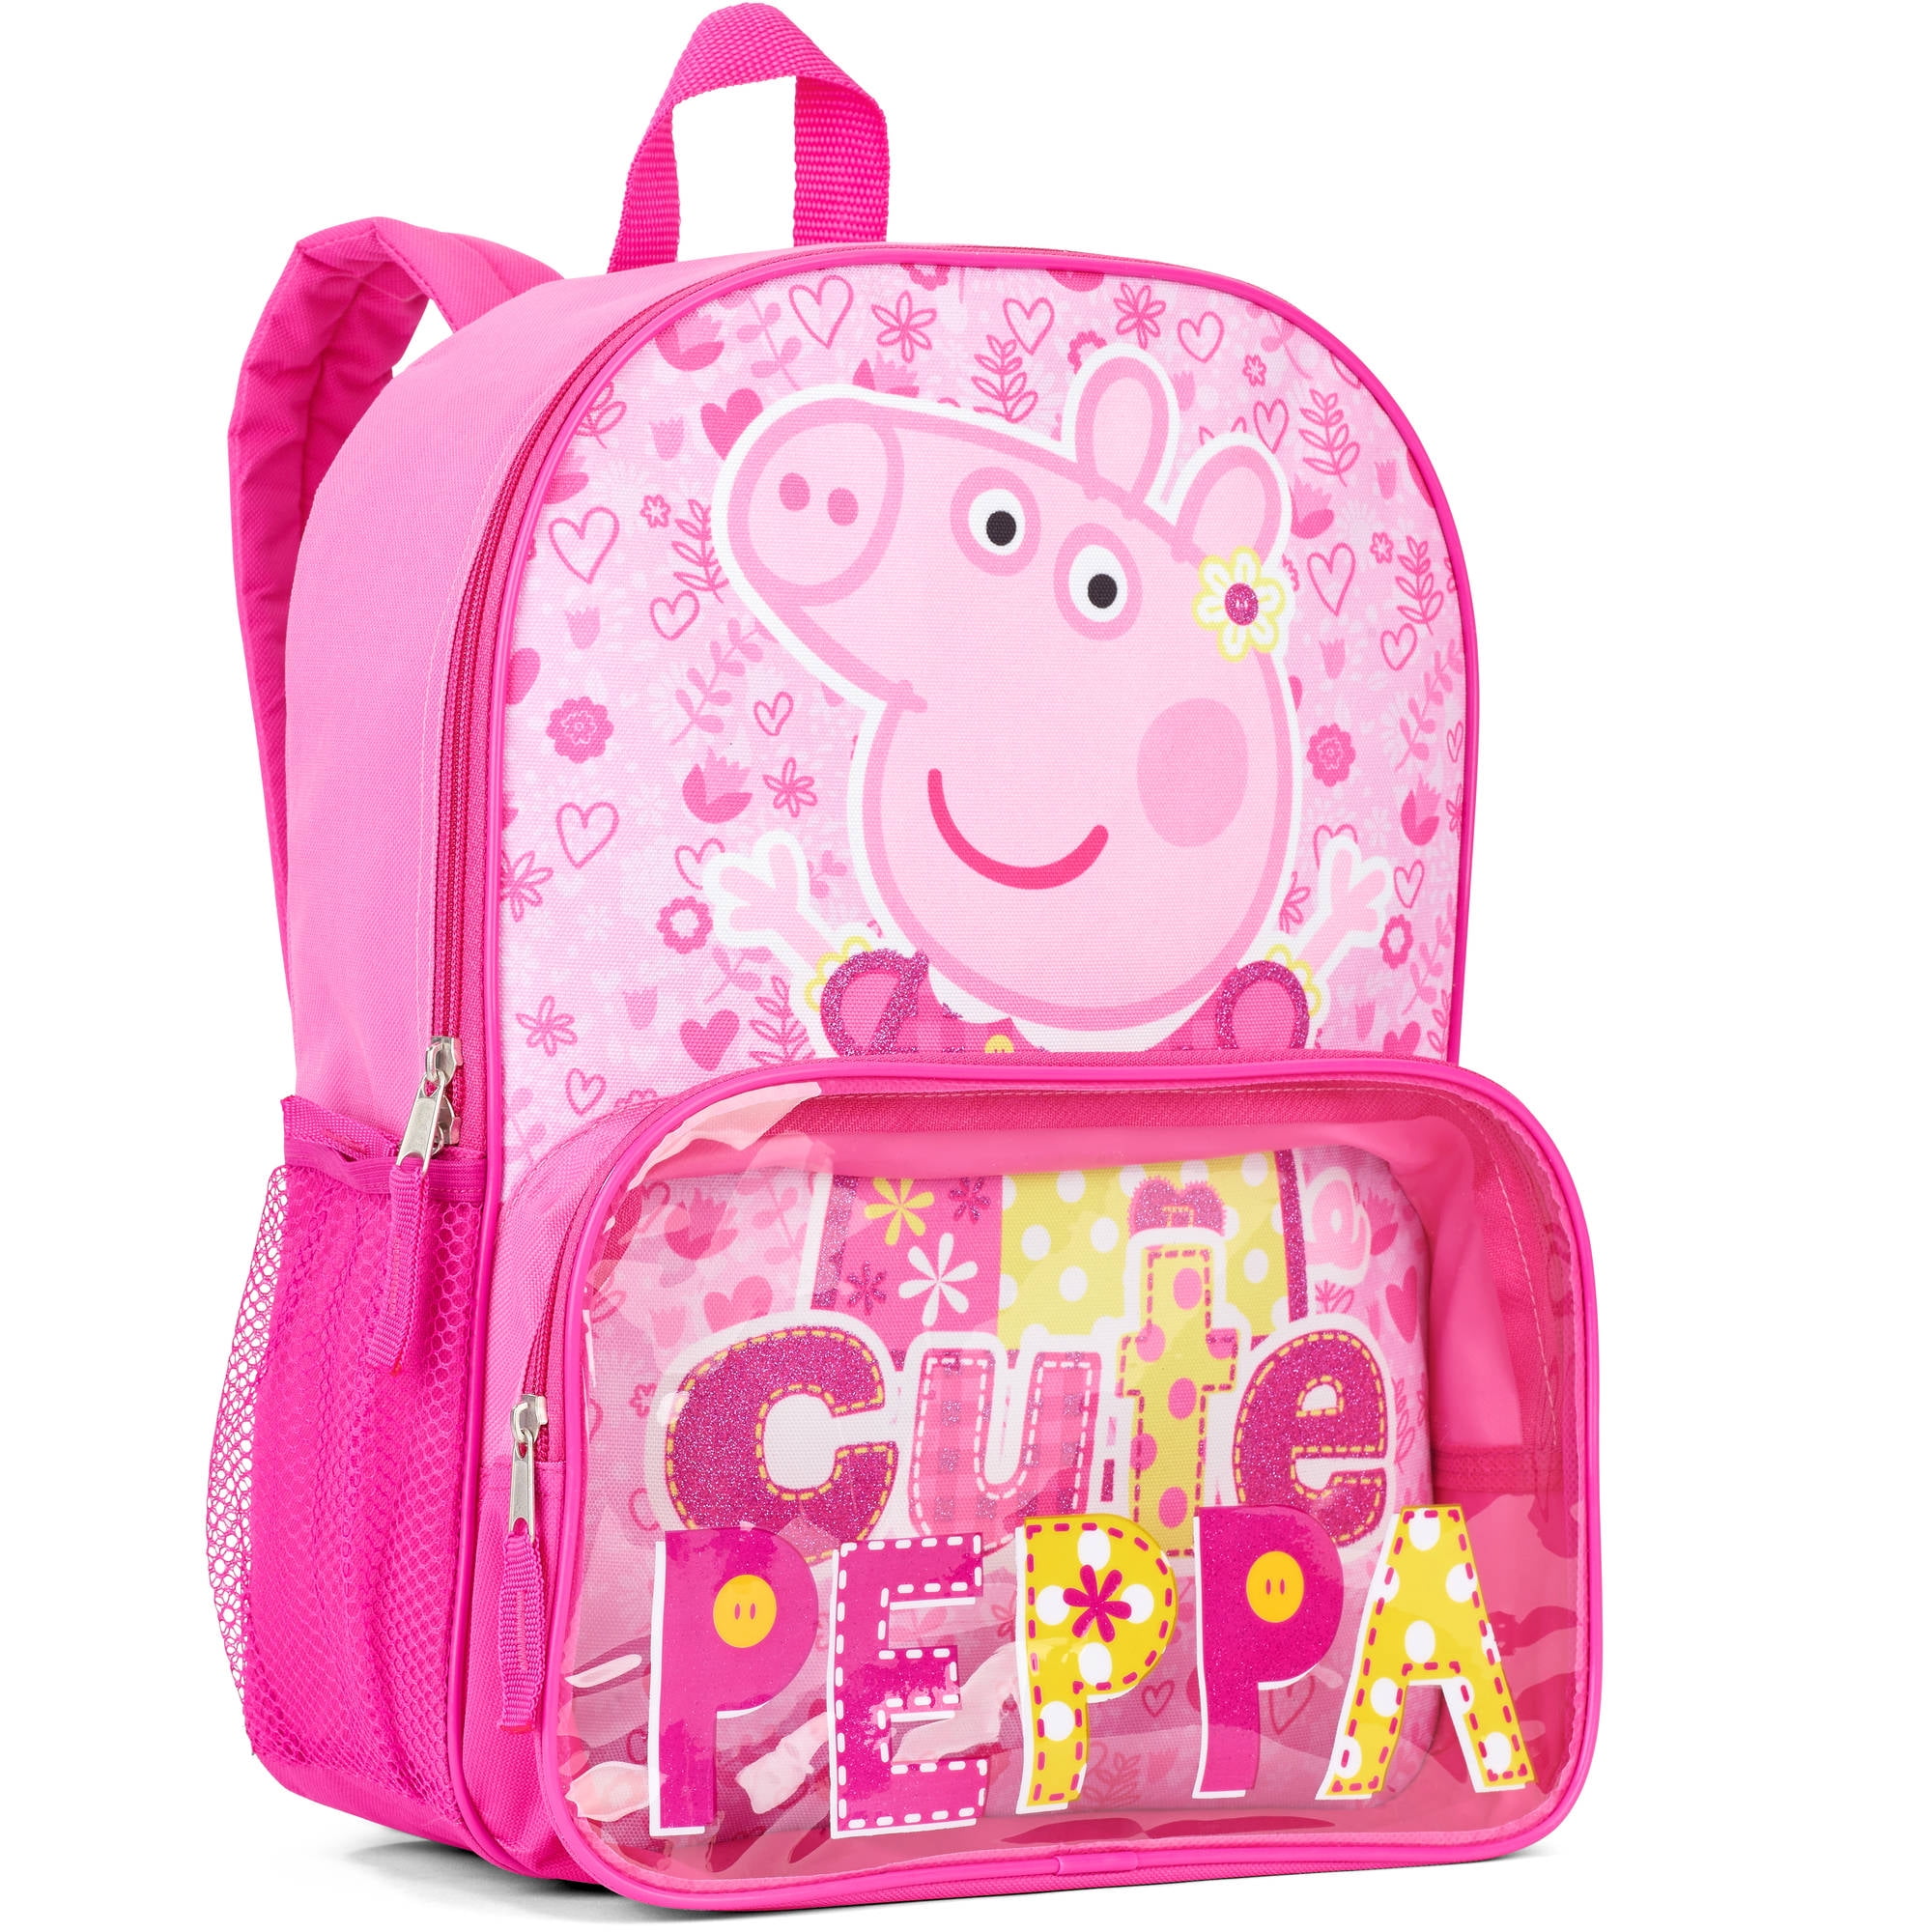 Peppa Pig Backpack with Lunch Box for Kids - 5 PC Bundle with 16 Peppa Pig School Backpack Bag, Lunch Bag, Water Bottle, Stickers, and More | Peppa